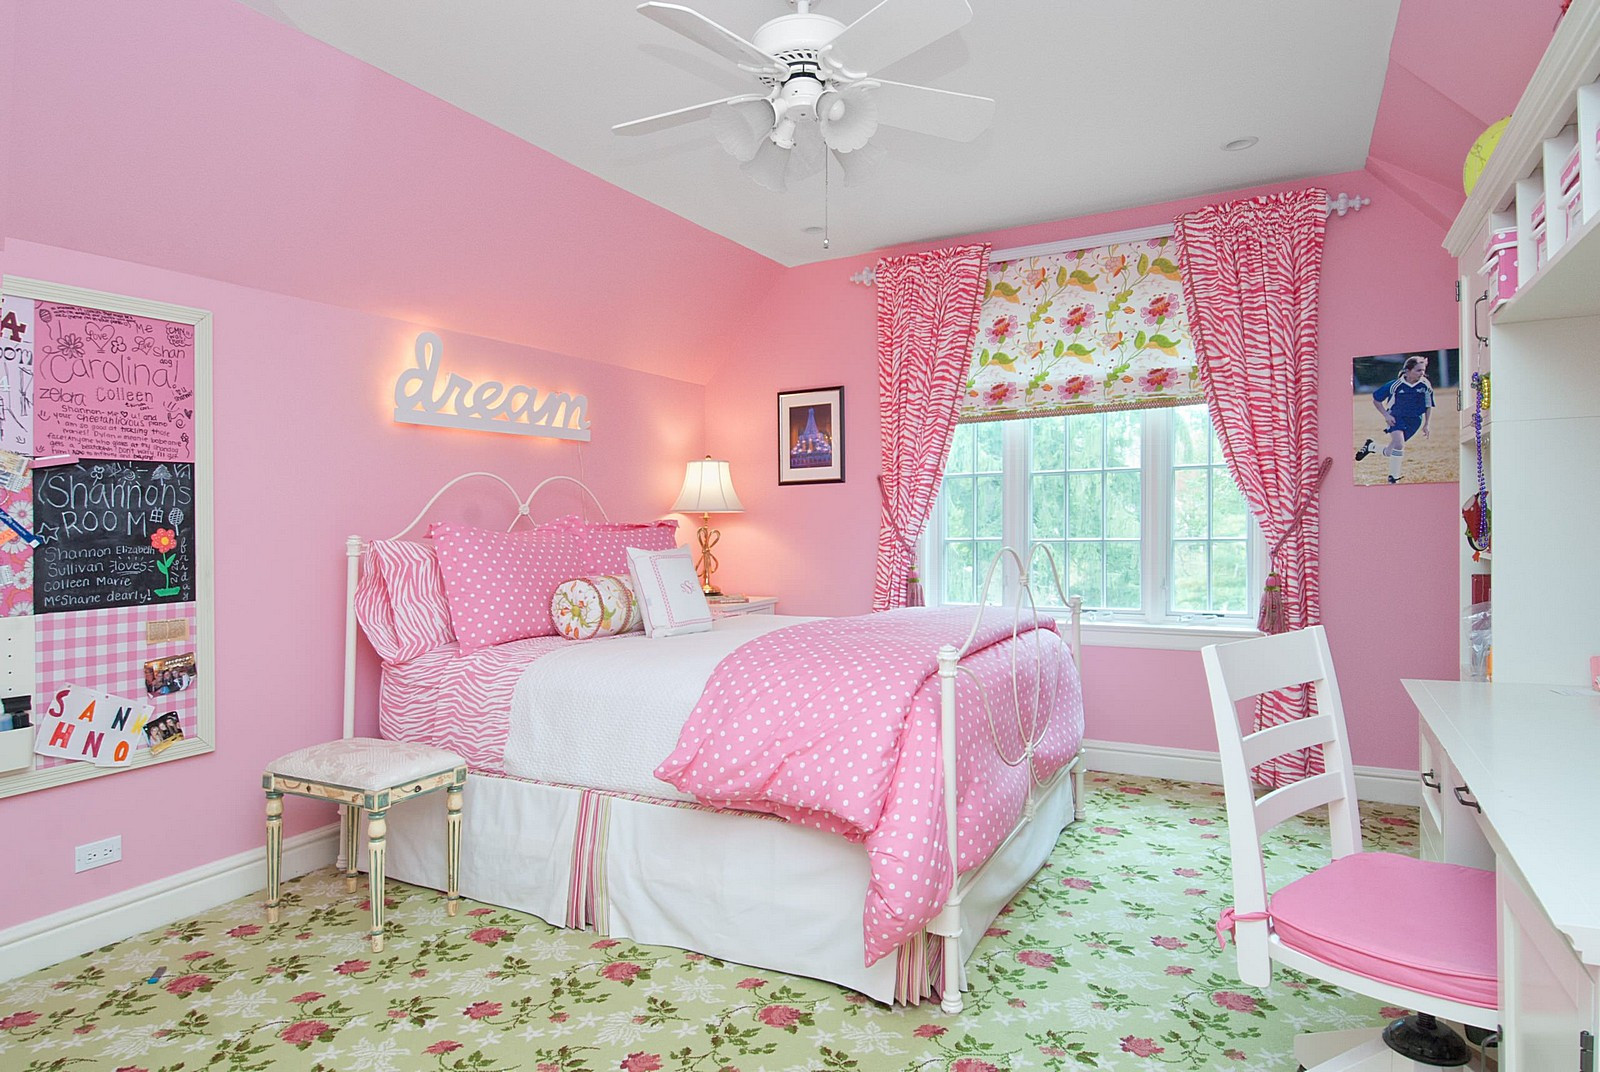 Girls Bedroom Accessories
 Feminine Bedroom Ideas For A Mature Woman TheyDesign